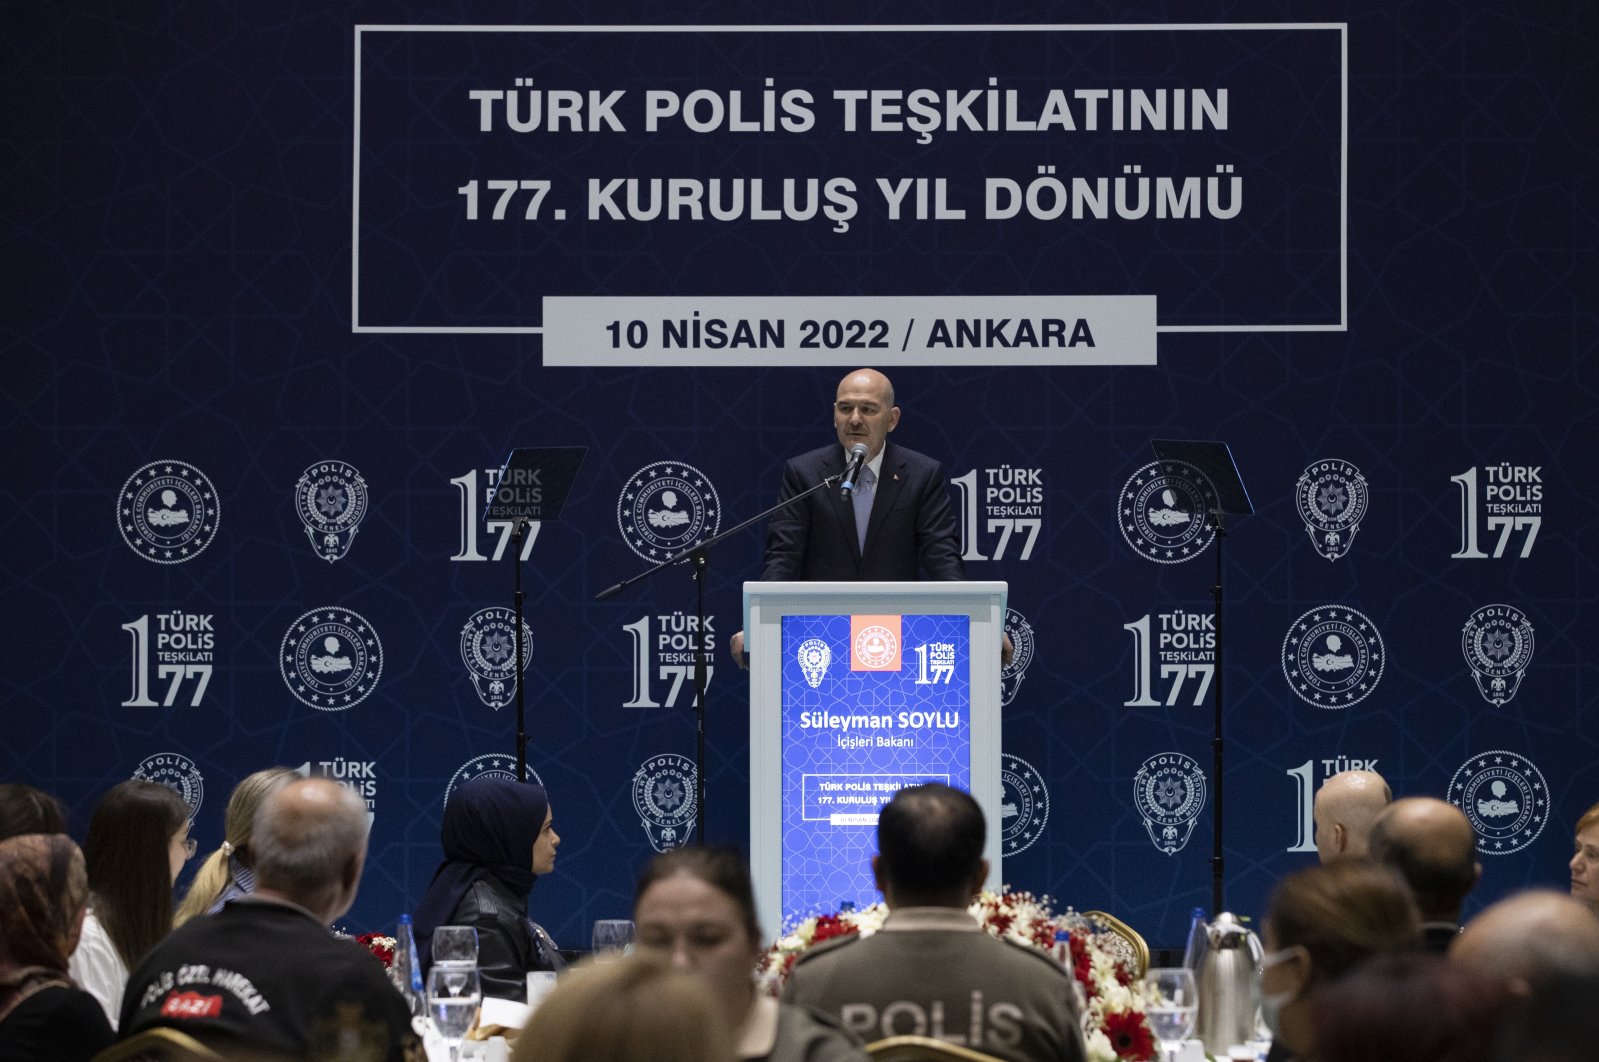 Interior Minister Süleyman Soylu speaks at the iftar dinner held on the occasion of the 177th anniversary of the establishment of the Turkish Police Service in the capital Ankara, Turkey, Apr. 10, 2022. (AA)